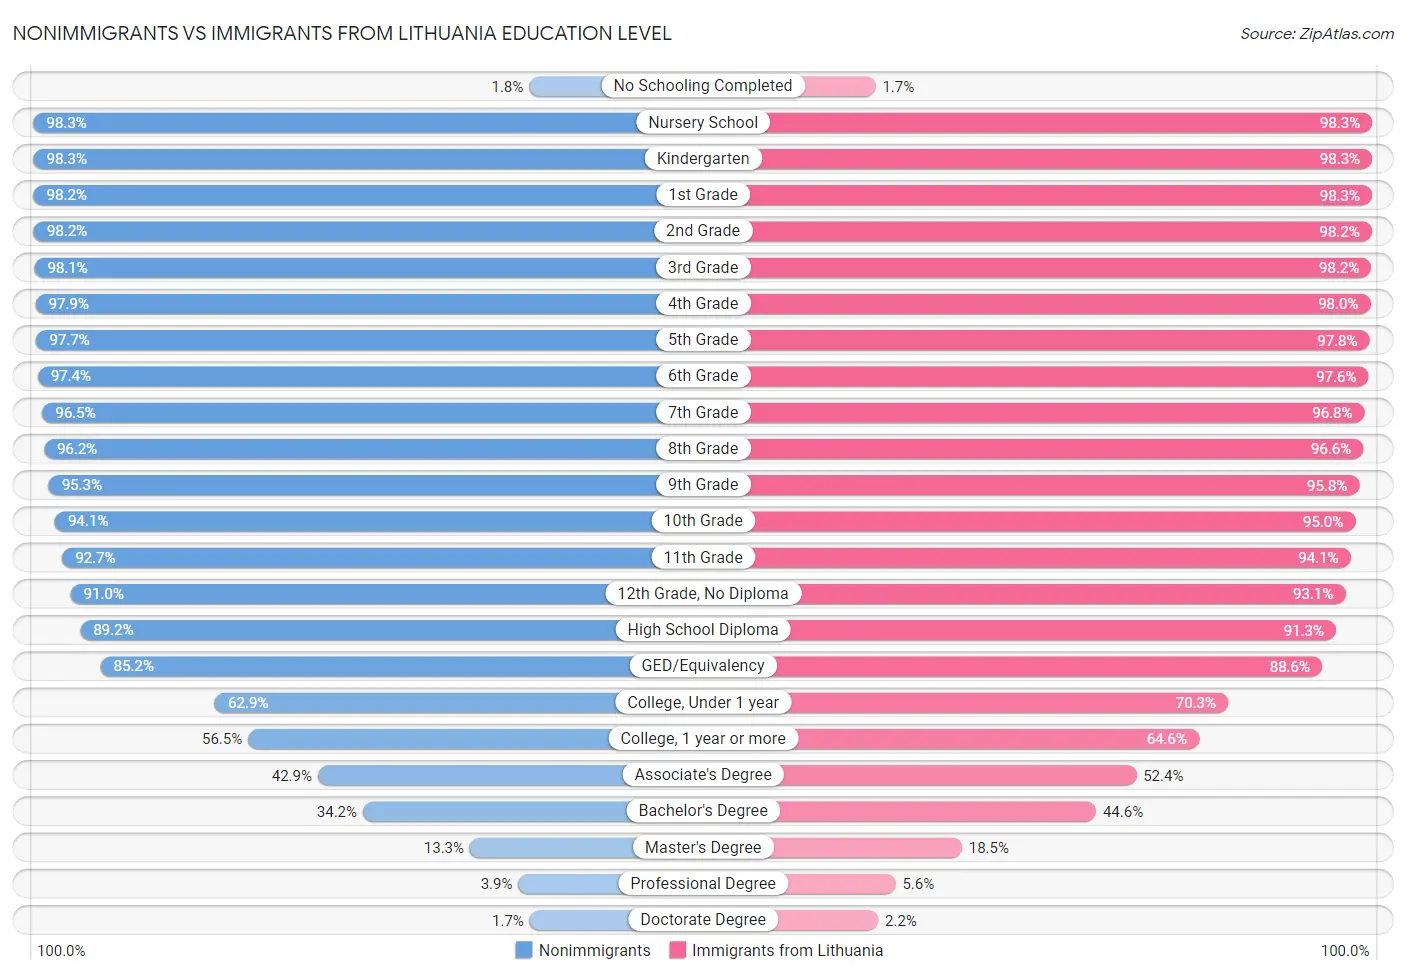 Nonimmigrants vs Immigrants from Lithuania Education Level